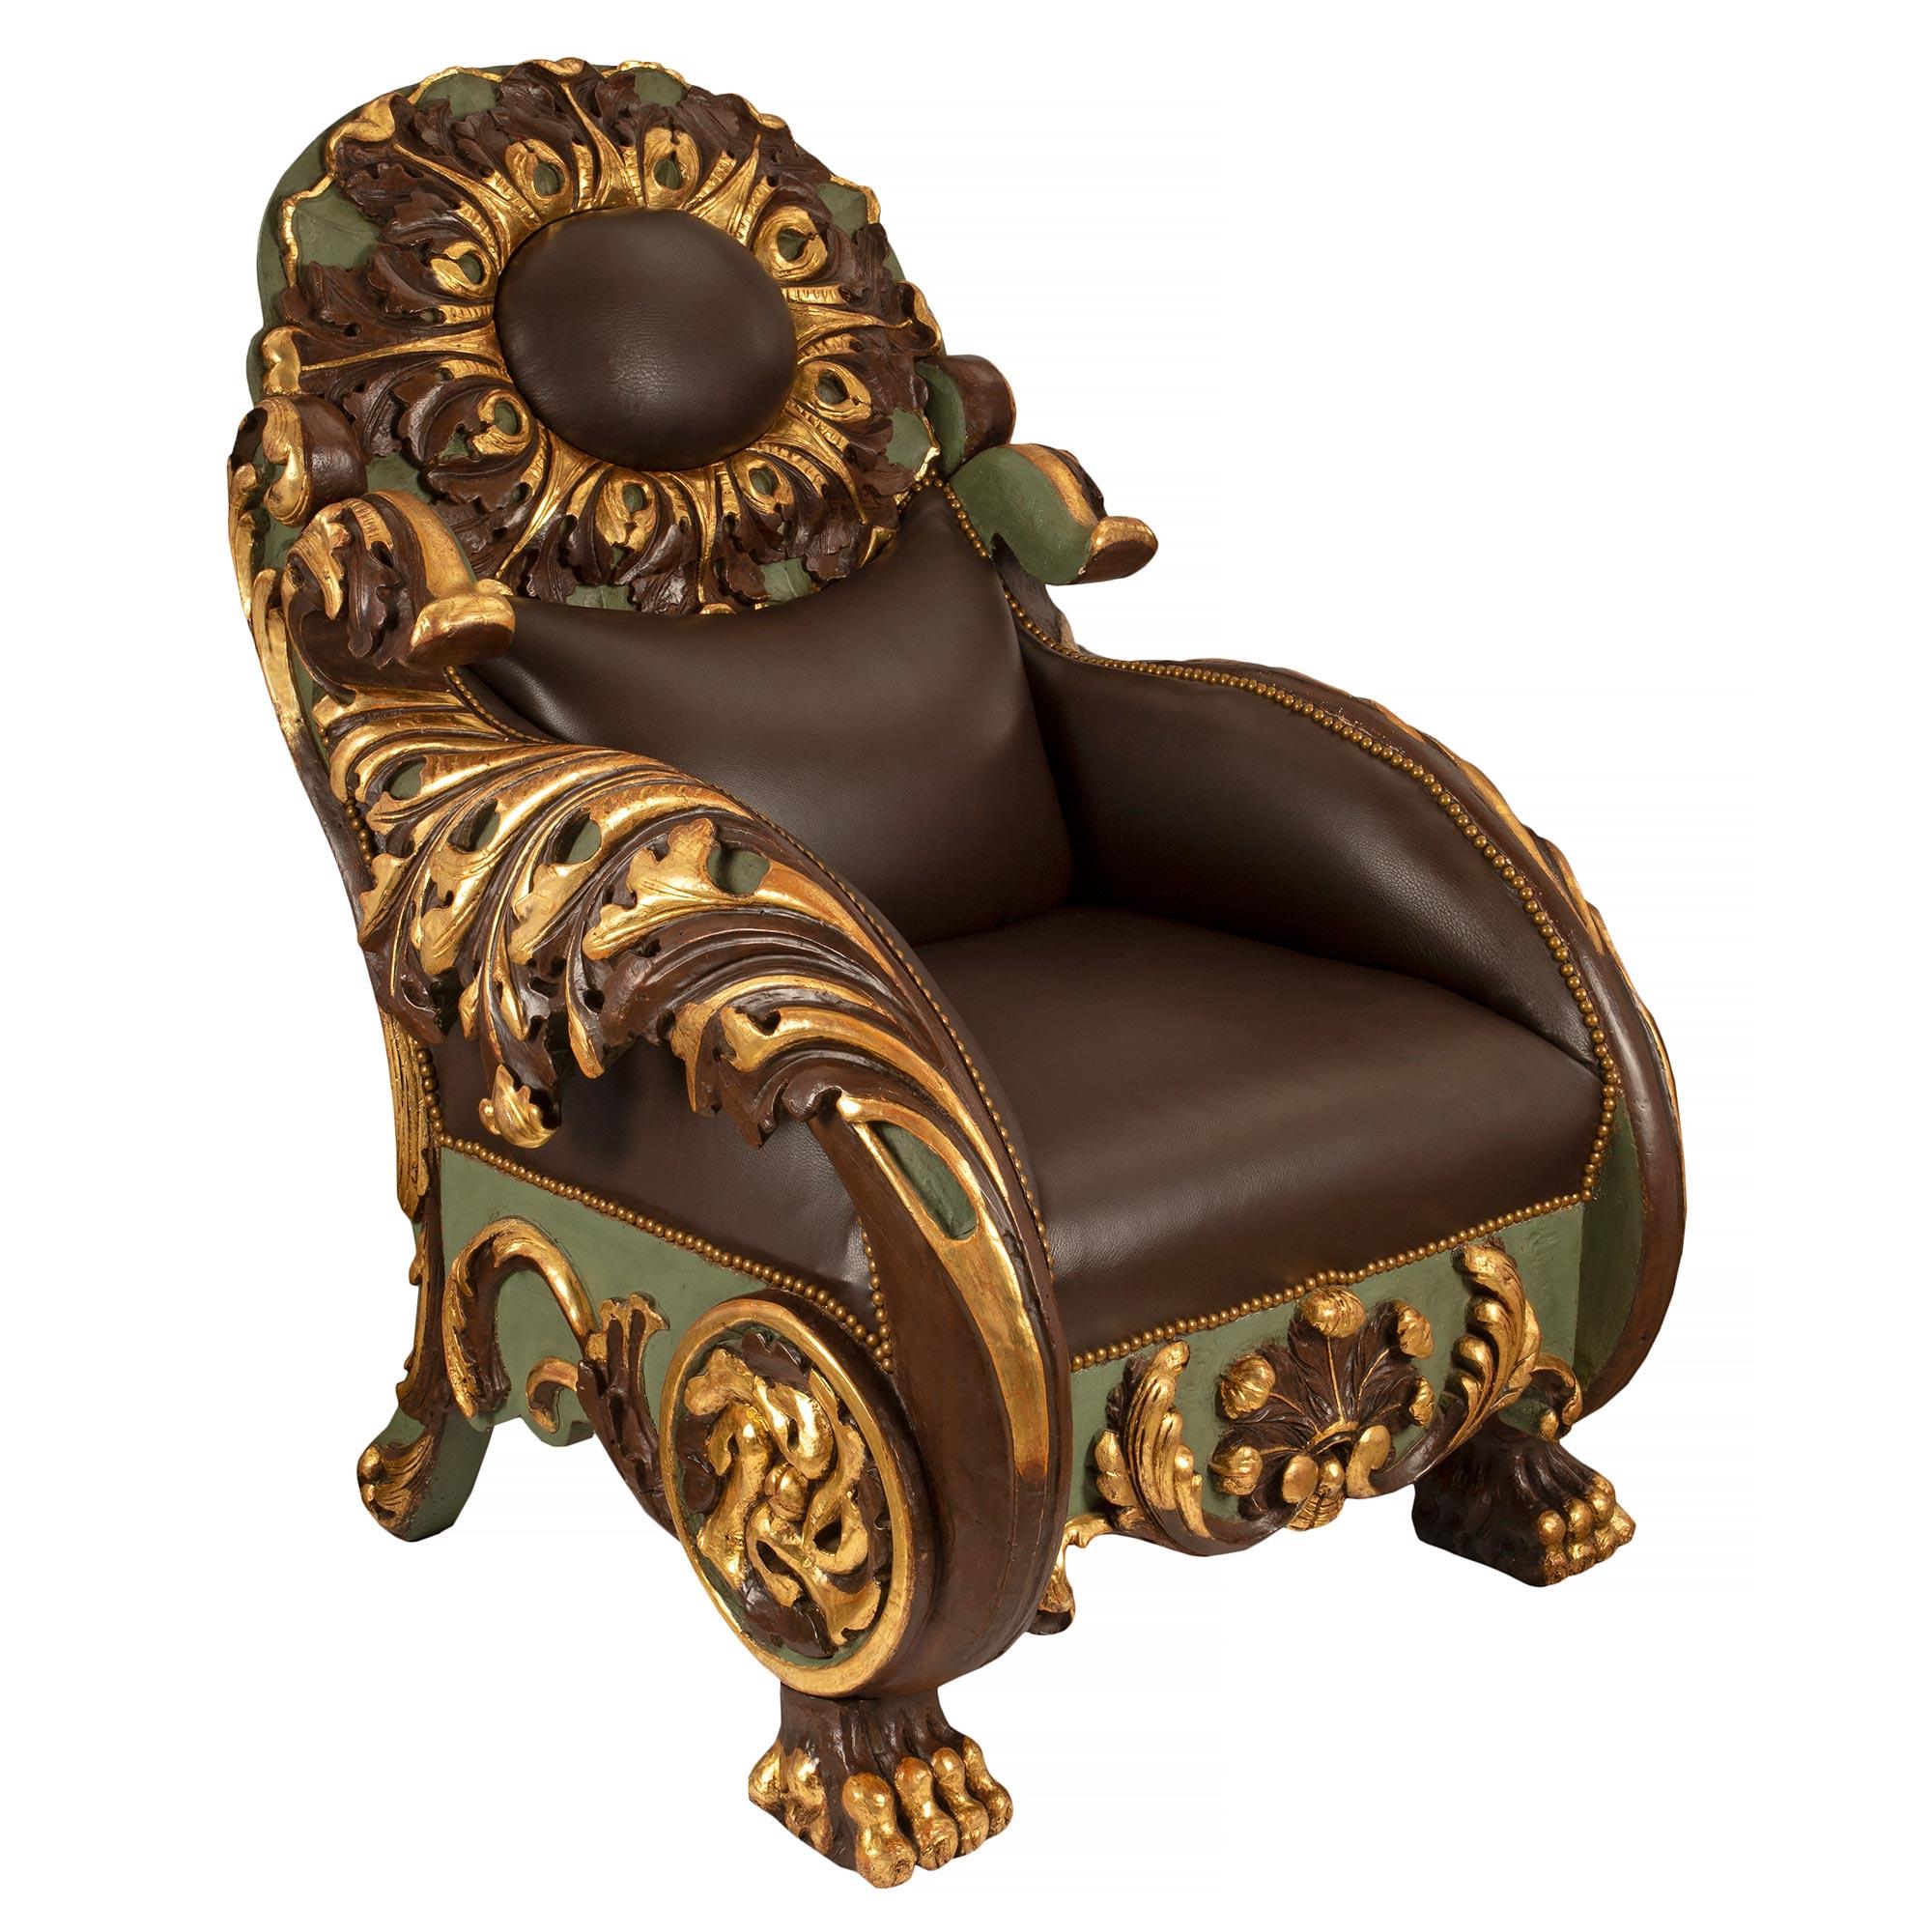 A sensational and extremely unique pair of Italian early 19th century Baroque polychrome and giltwood armchairs. Each rare armchair is raised by handsome polychrome paw feet with giltwood accents. Striking and large elaborate scrolls extend down